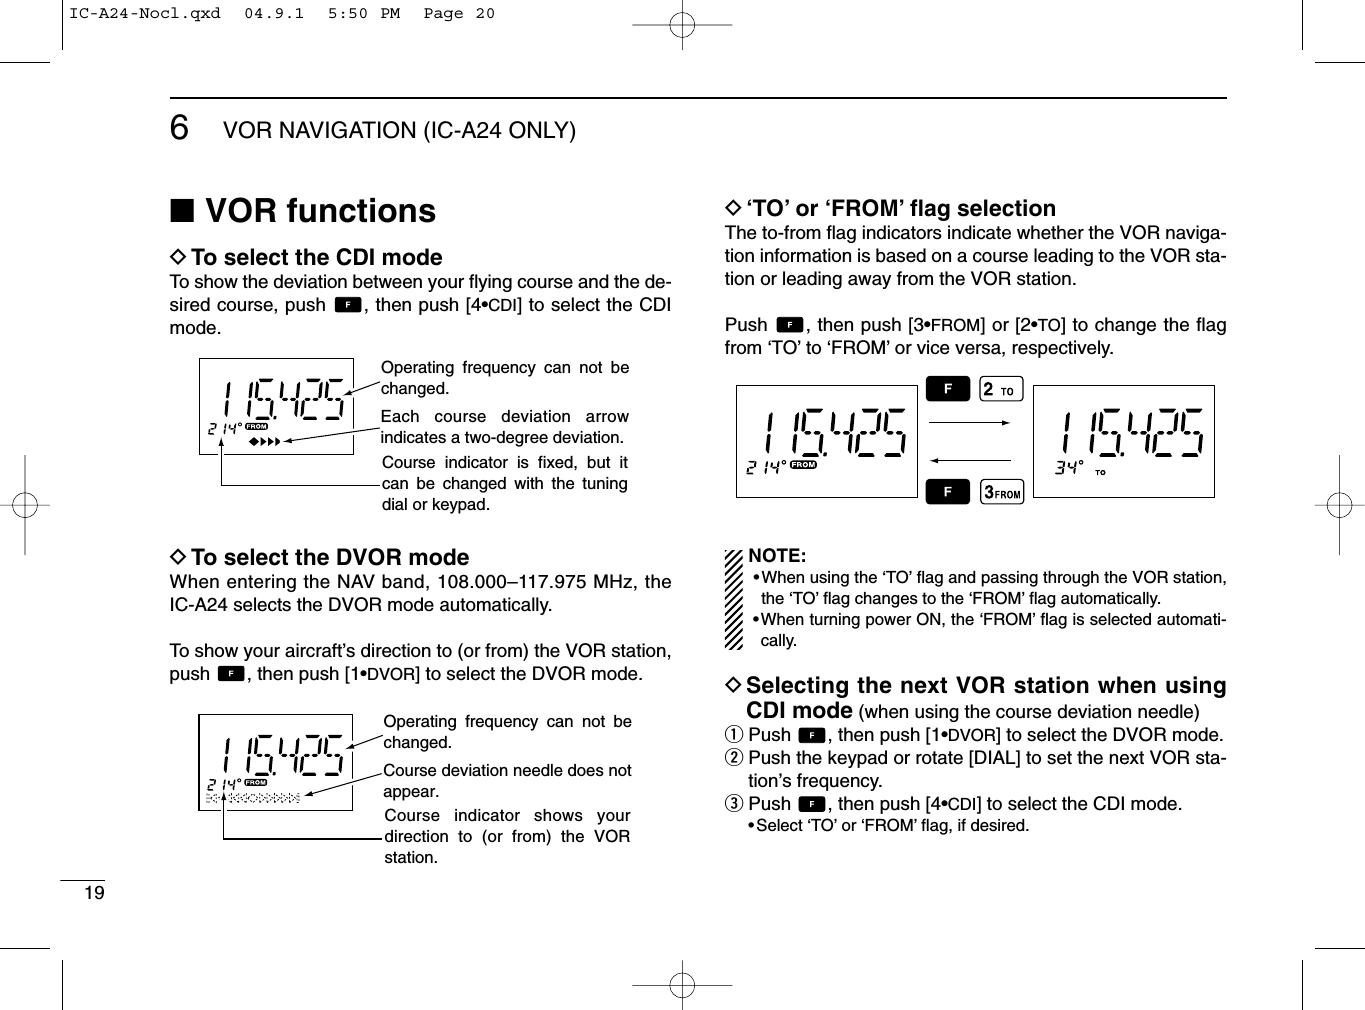 196VOR NAVIGATION (IC-A24 ONLY)■VOR functionsDTo select the CDI modeTo show the deviation between your ﬂying course and the de-sired course, push  , then push [4•CDI] to select the CDImode.DTo select the DVOR modeWhen entering the NAV band, 108.000–117.975 MHz, theIC-A24 selects the DVOR mode automatically.To show your aircraft’s direction to (or from) the VOR station,push  , then push [1•DVOR] to select the DVOR mode.D‘TO’or ‘FROM’ﬂag selectionThe to-from ﬂag indicators indicate whether the VOR naviga-tion information is based on a course leading to the VOR sta-tion or leading away from the VOR station.Push  , then push [3•FROM] or [2•TO] to change the ﬂagfrom ‘TO’to ‘FROM’or vice versa, respectively.NOTE:•When using the ‘TO’ﬂag and passing through the VOR station,the ‘TO’ﬂag changes to the ‘FROM’ﬂag automatically.•When turning power ON, the ‘FROM’ﬂag is selected automati-cally.DSelecting the next VOR station when usingCDI mode (when using the course deviation needle)qPush  , then push [1•DVOR] to select the DVOR mode.wPush the keypad or rotate [DIAL] to set the next VOR sta-tion’s frequency.ePush  , then push [4•CDI] to select the CDI mode.•Select ‘TO’or ‘FROM’ﬂag, if desired.Operating frequency can not be changed.Each course deviation arrow indicates a two-degree deviation.Course indicator is fixed, but it can be changed with the tuning dial or keypad.Operating frequency can not be changed.Course deviation needle does not appear.Course indicator shows your direction to (or from) the VOR station.IC-A24-Nocl.qxd  04.9.1  5:50 PM  Page 20